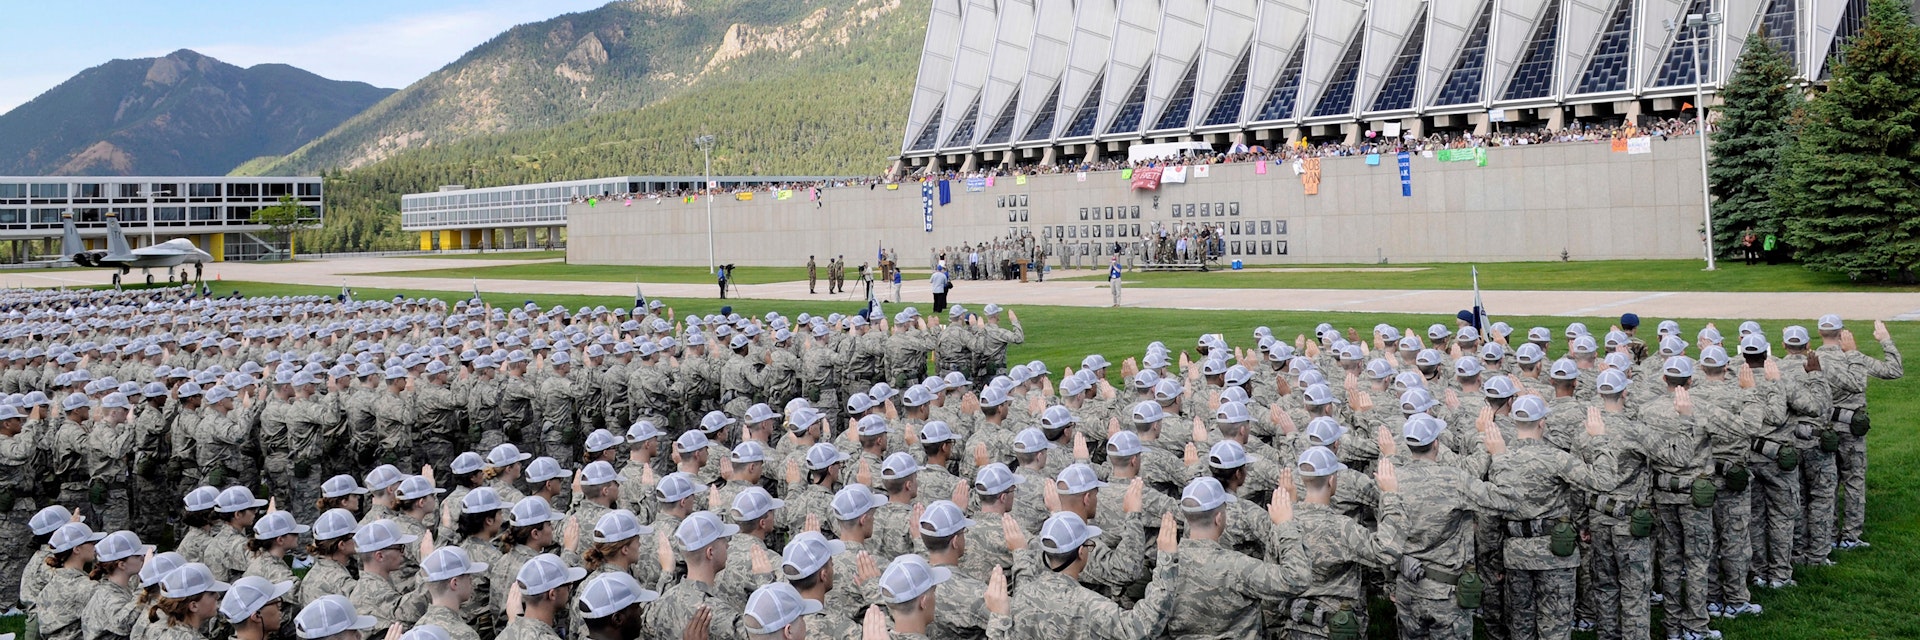 G3YYM0 Cadets recite the Oath of Allegiance.

June 26, 2009 - The 1,376 members of the Class of 2013 recites the Oath of Allegiance in front of the cadet chapel, family and friends during their first formation at the U.S. Air Force Academy in Colorado Springs, Colorado
